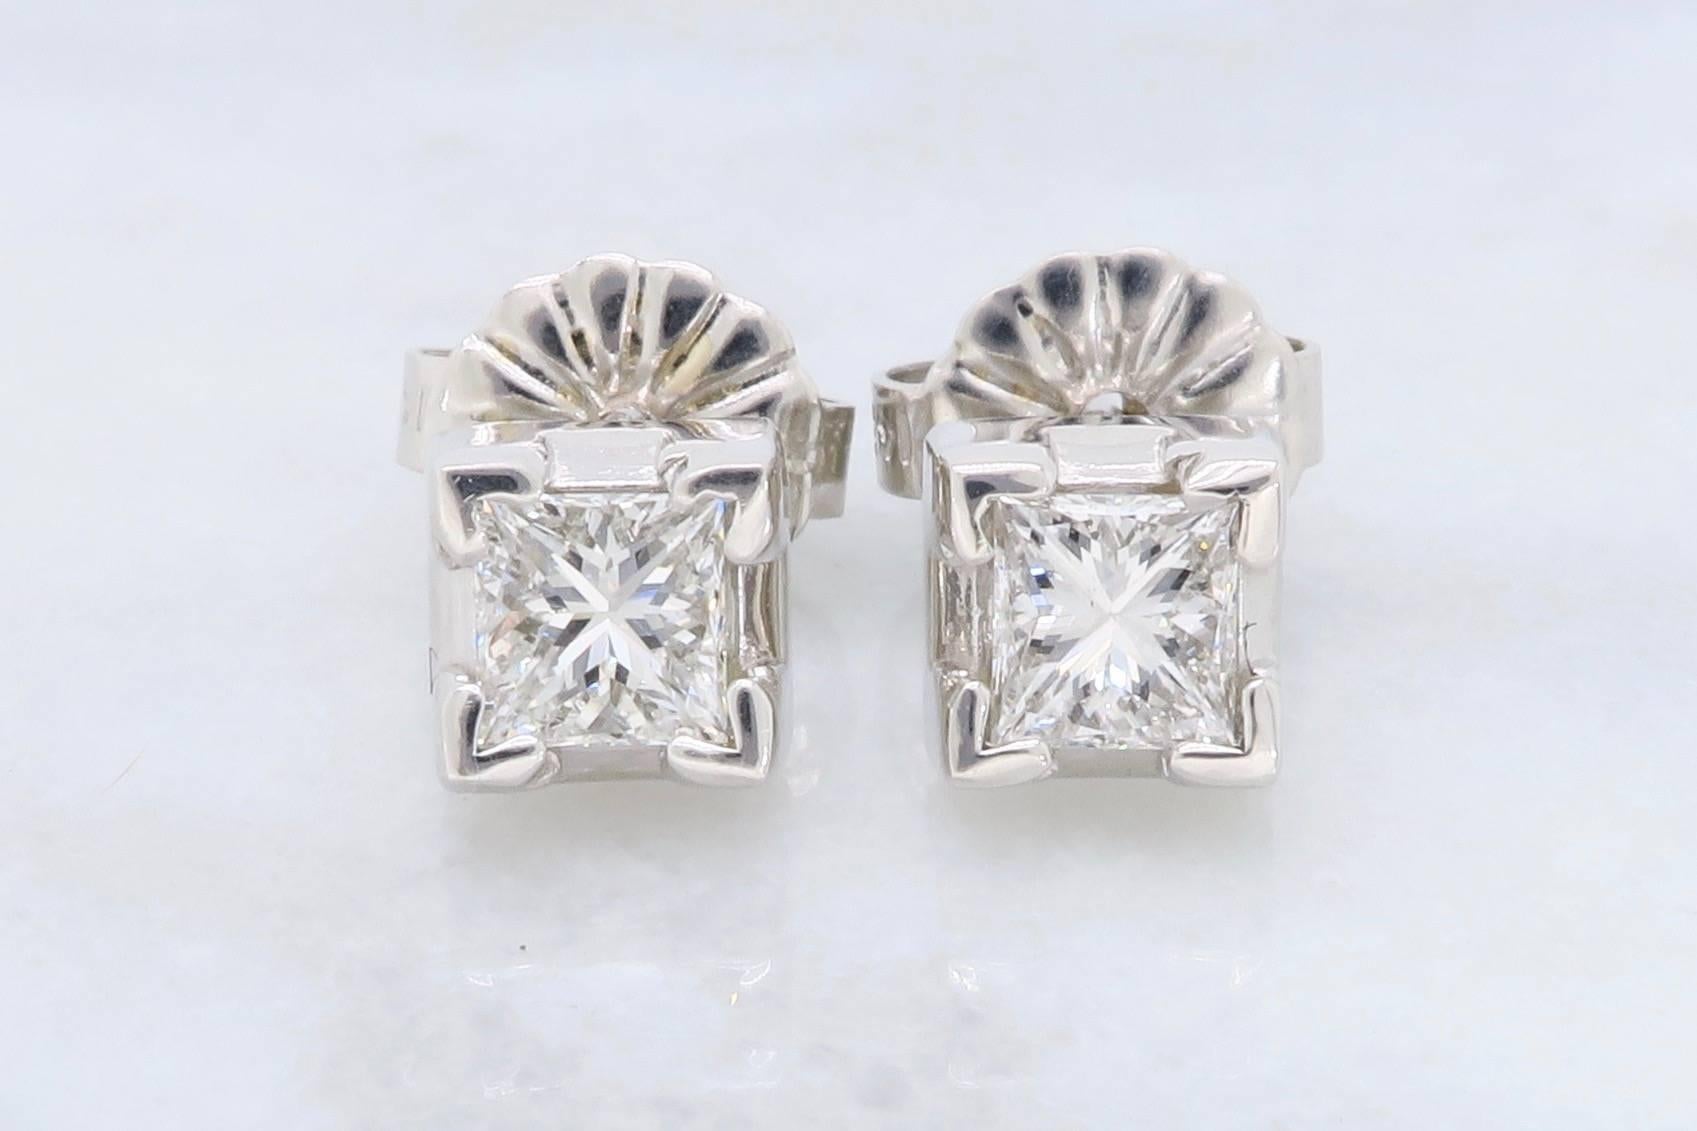 Classic diamond stud earrings with Princess Cut Diamonds. The diamonds have G-H color and SI clarity. The total diamond weight is approximately .50CTW. The 14K white gold earrings weigh 1.3 grams.